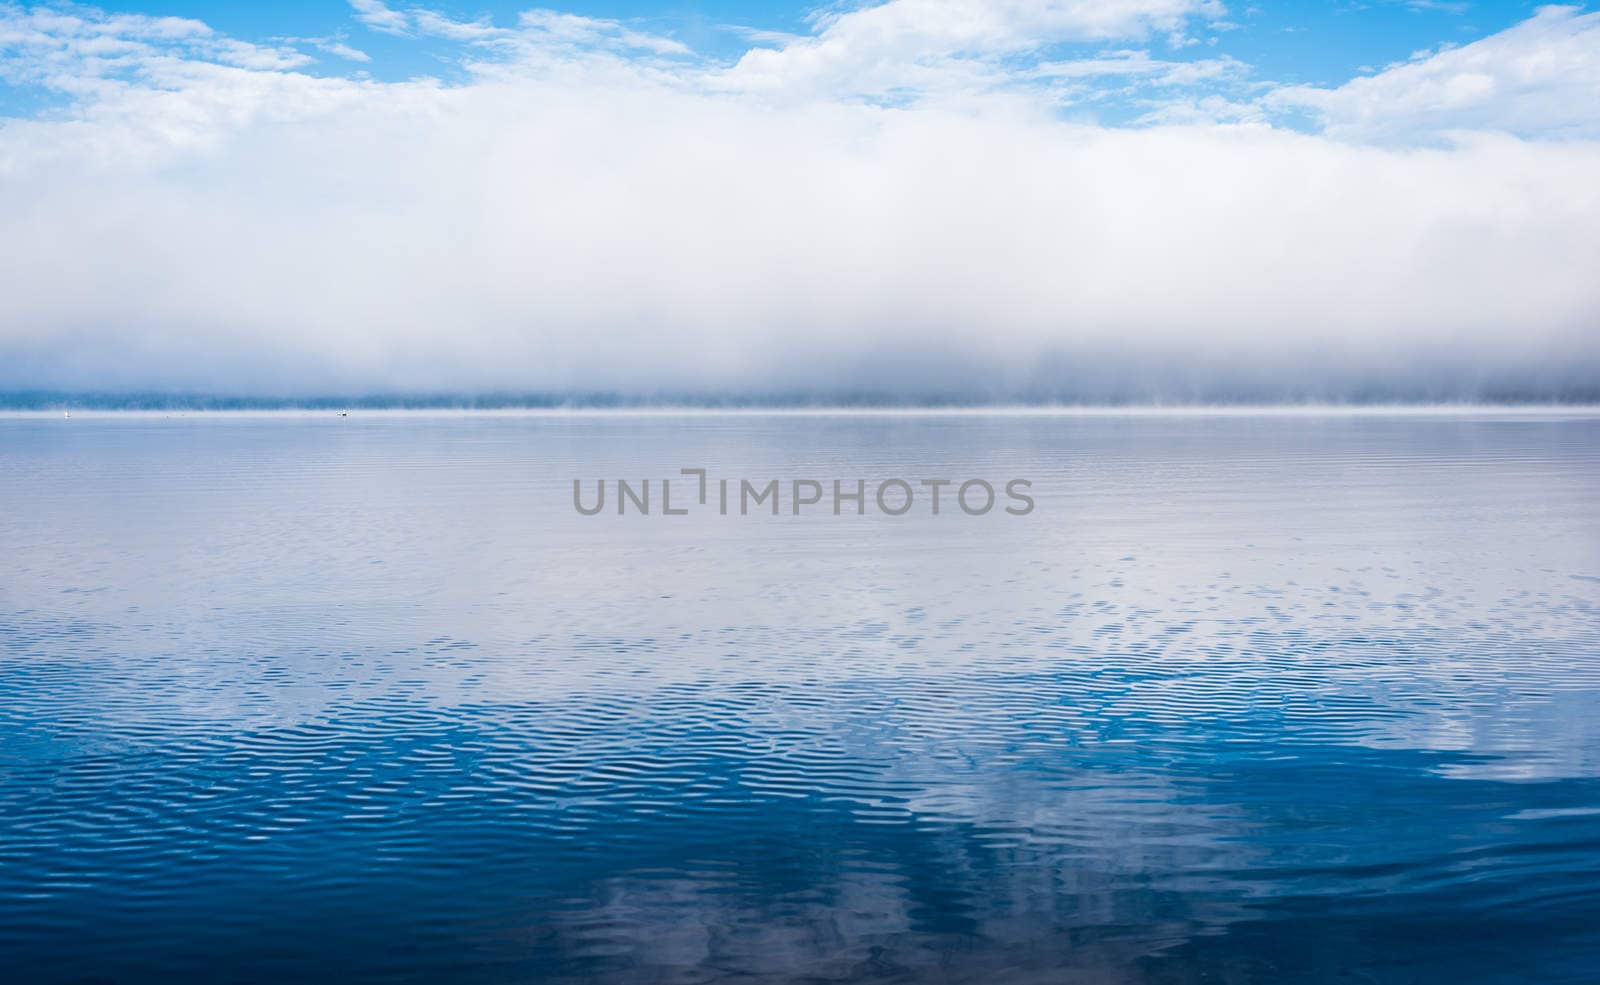 Fog rising from blue - Receding fog line on the Ottawa River - horizontal divide of two environments - air and water creates a visual spectacle.